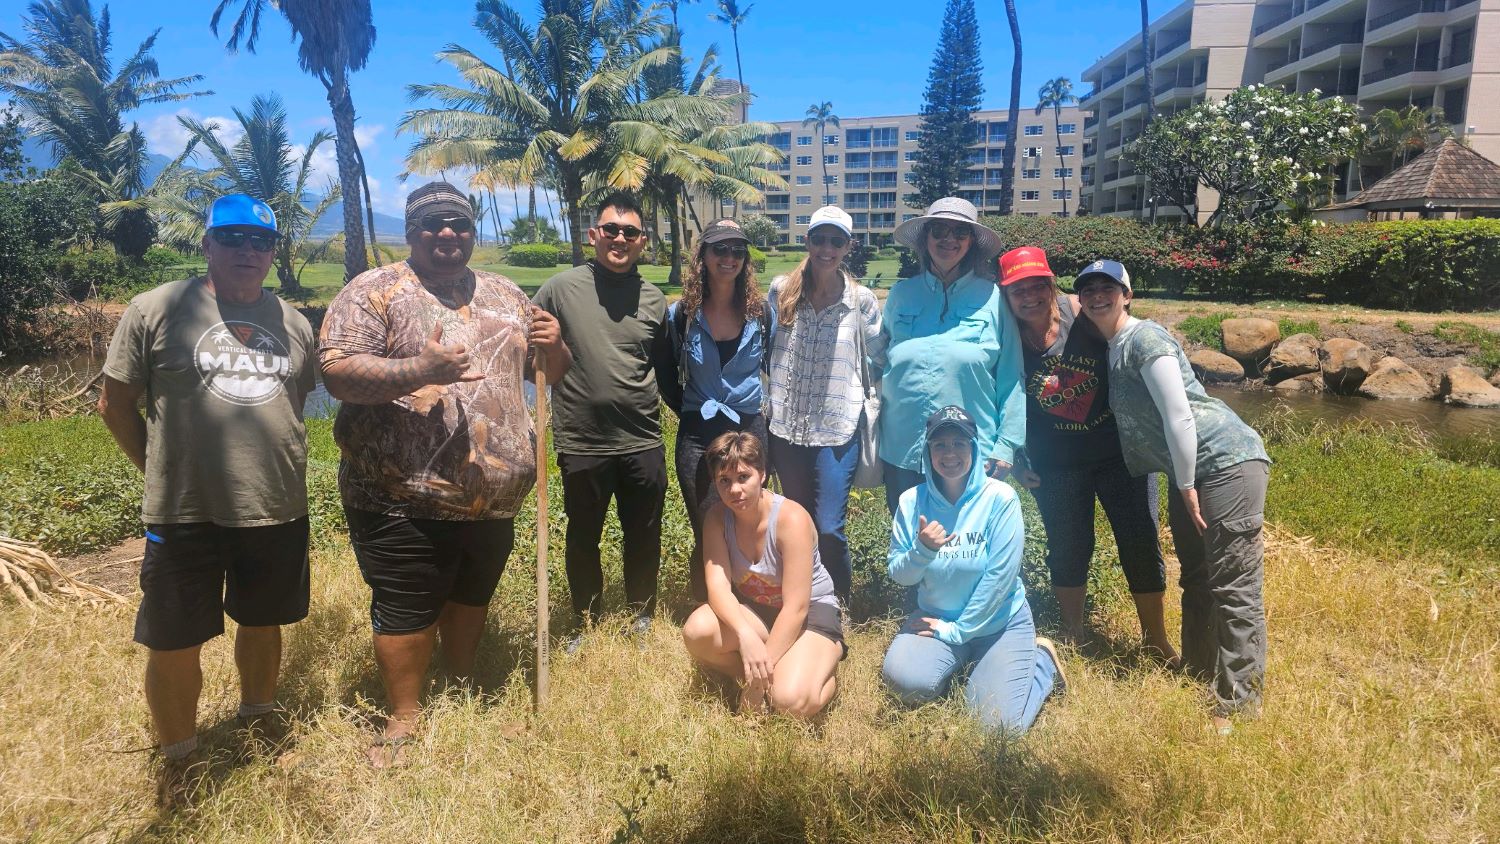 Workshop attendees on the South Maui Urban Wetlands Tour and field trip.